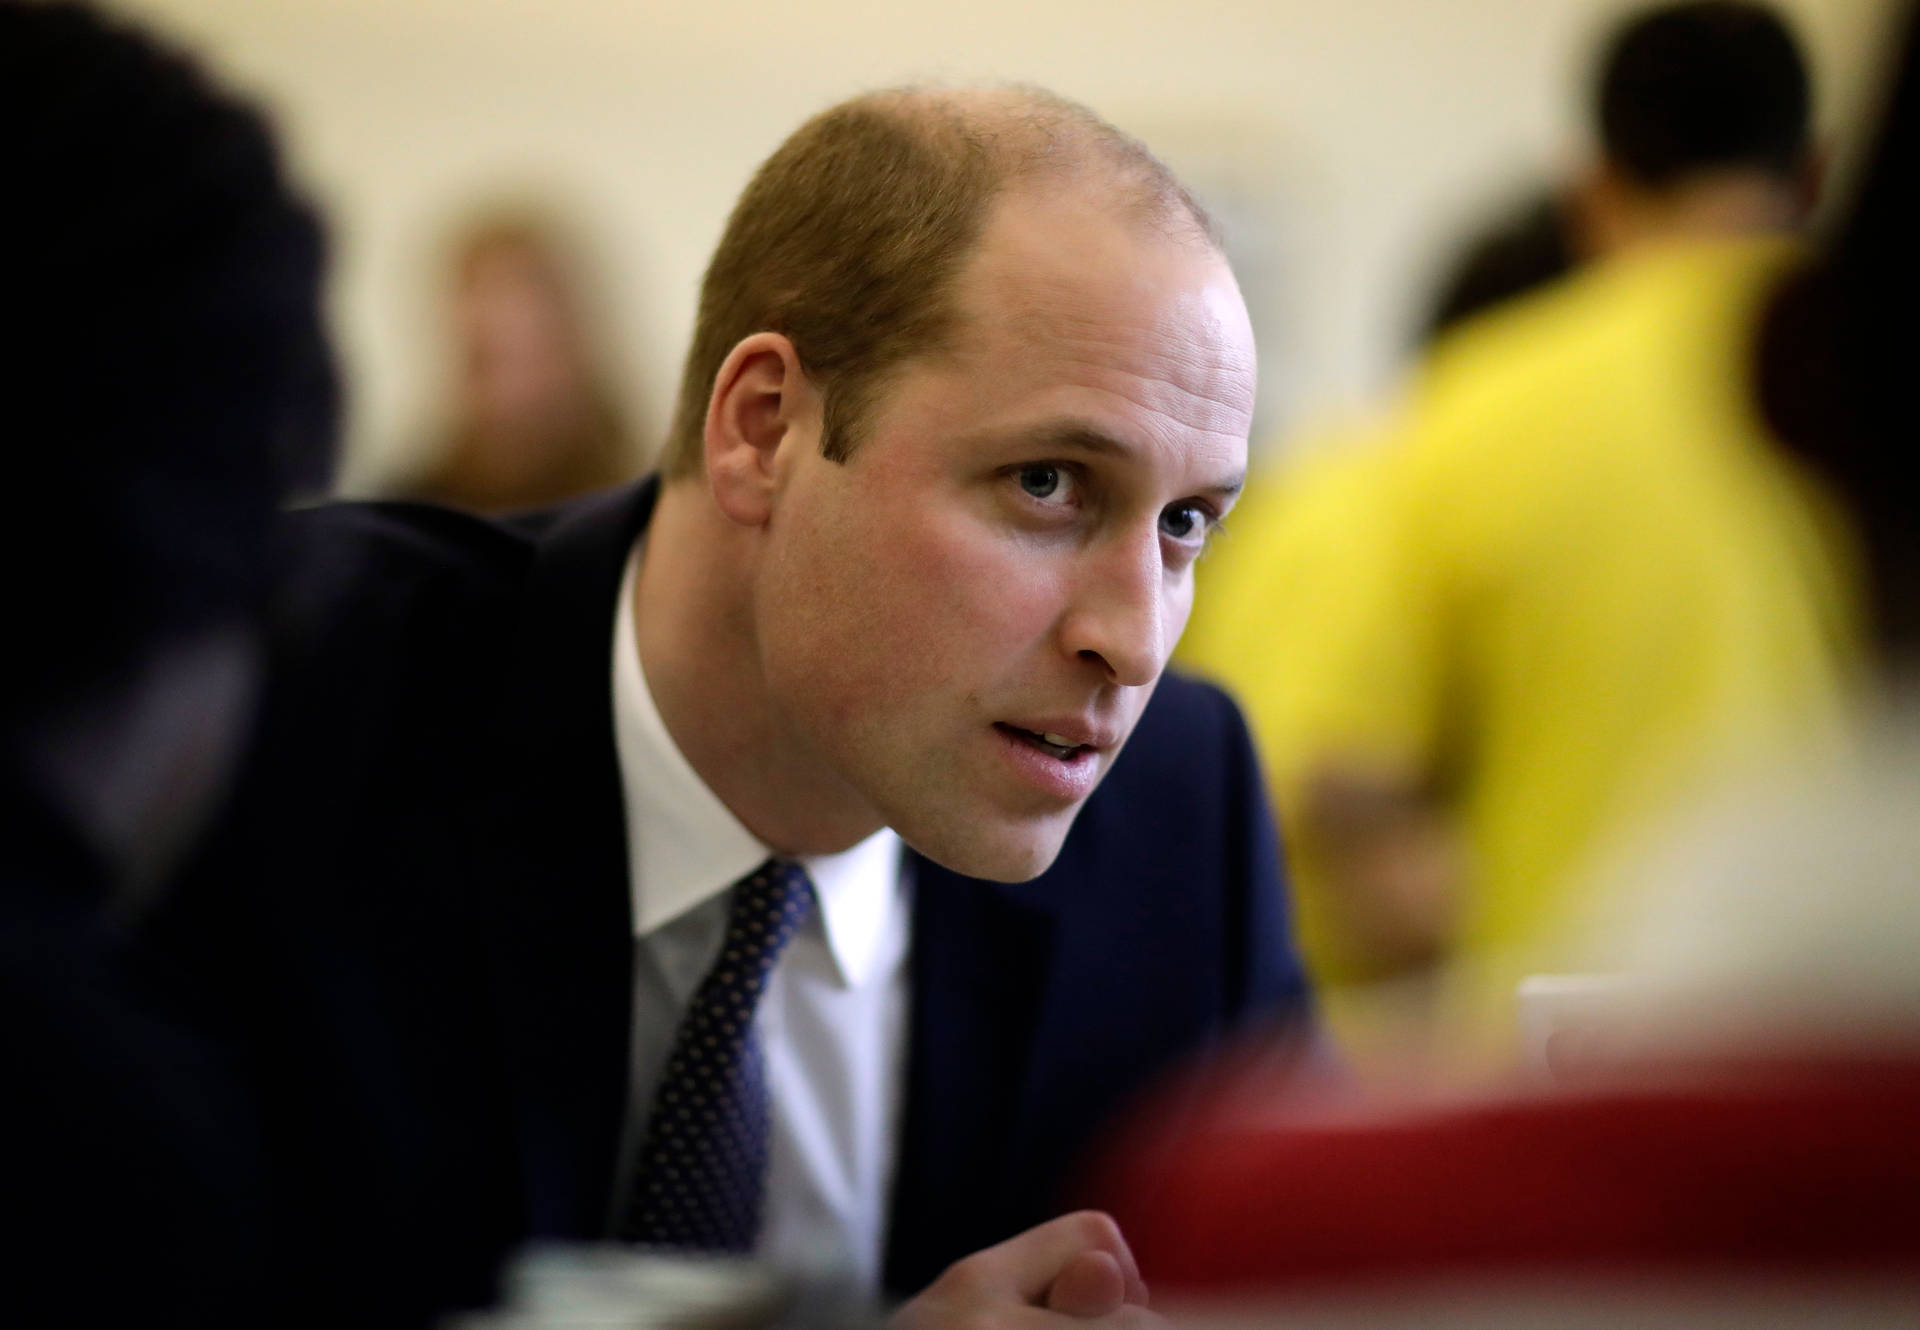 Prince William Engages Sincerely In A Conversation Background